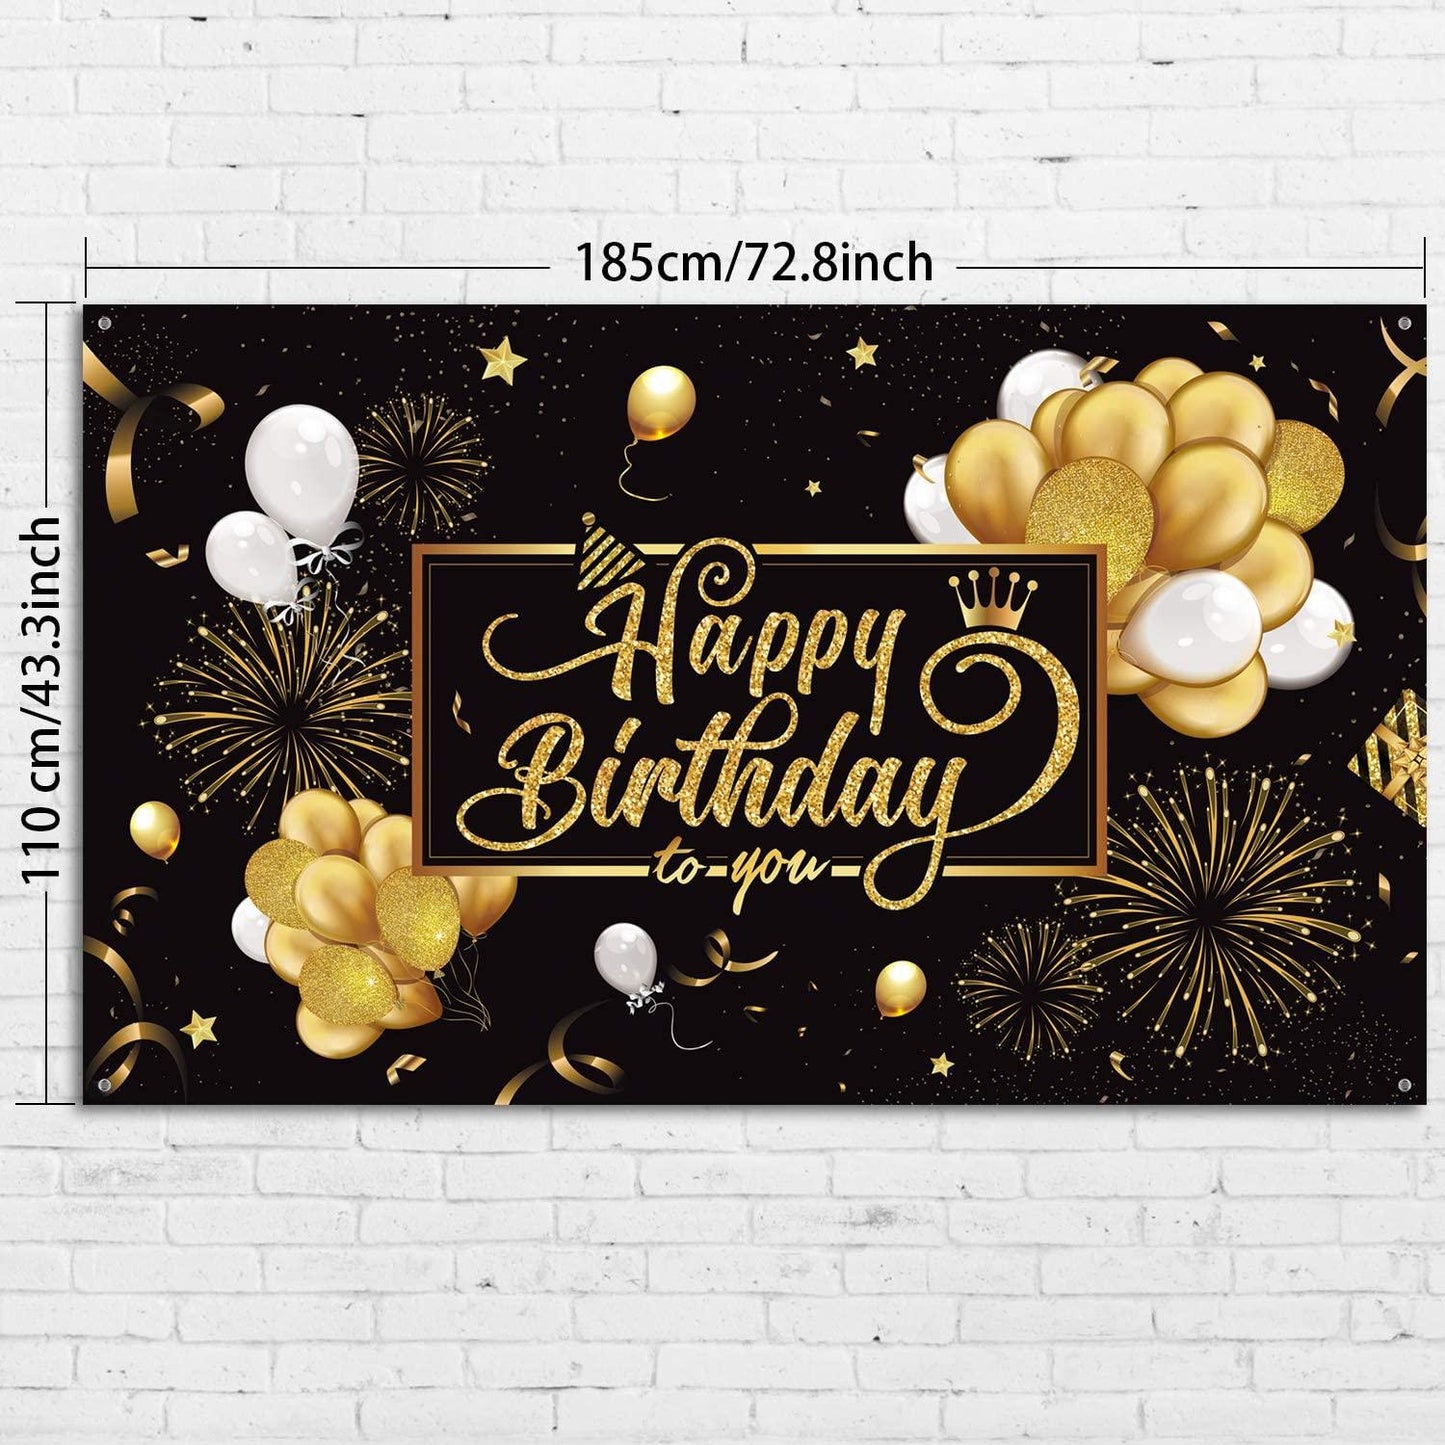 Happy Birthday Backdrop Banner Black and Gold Sign Poster Large Fabric - If you say i do